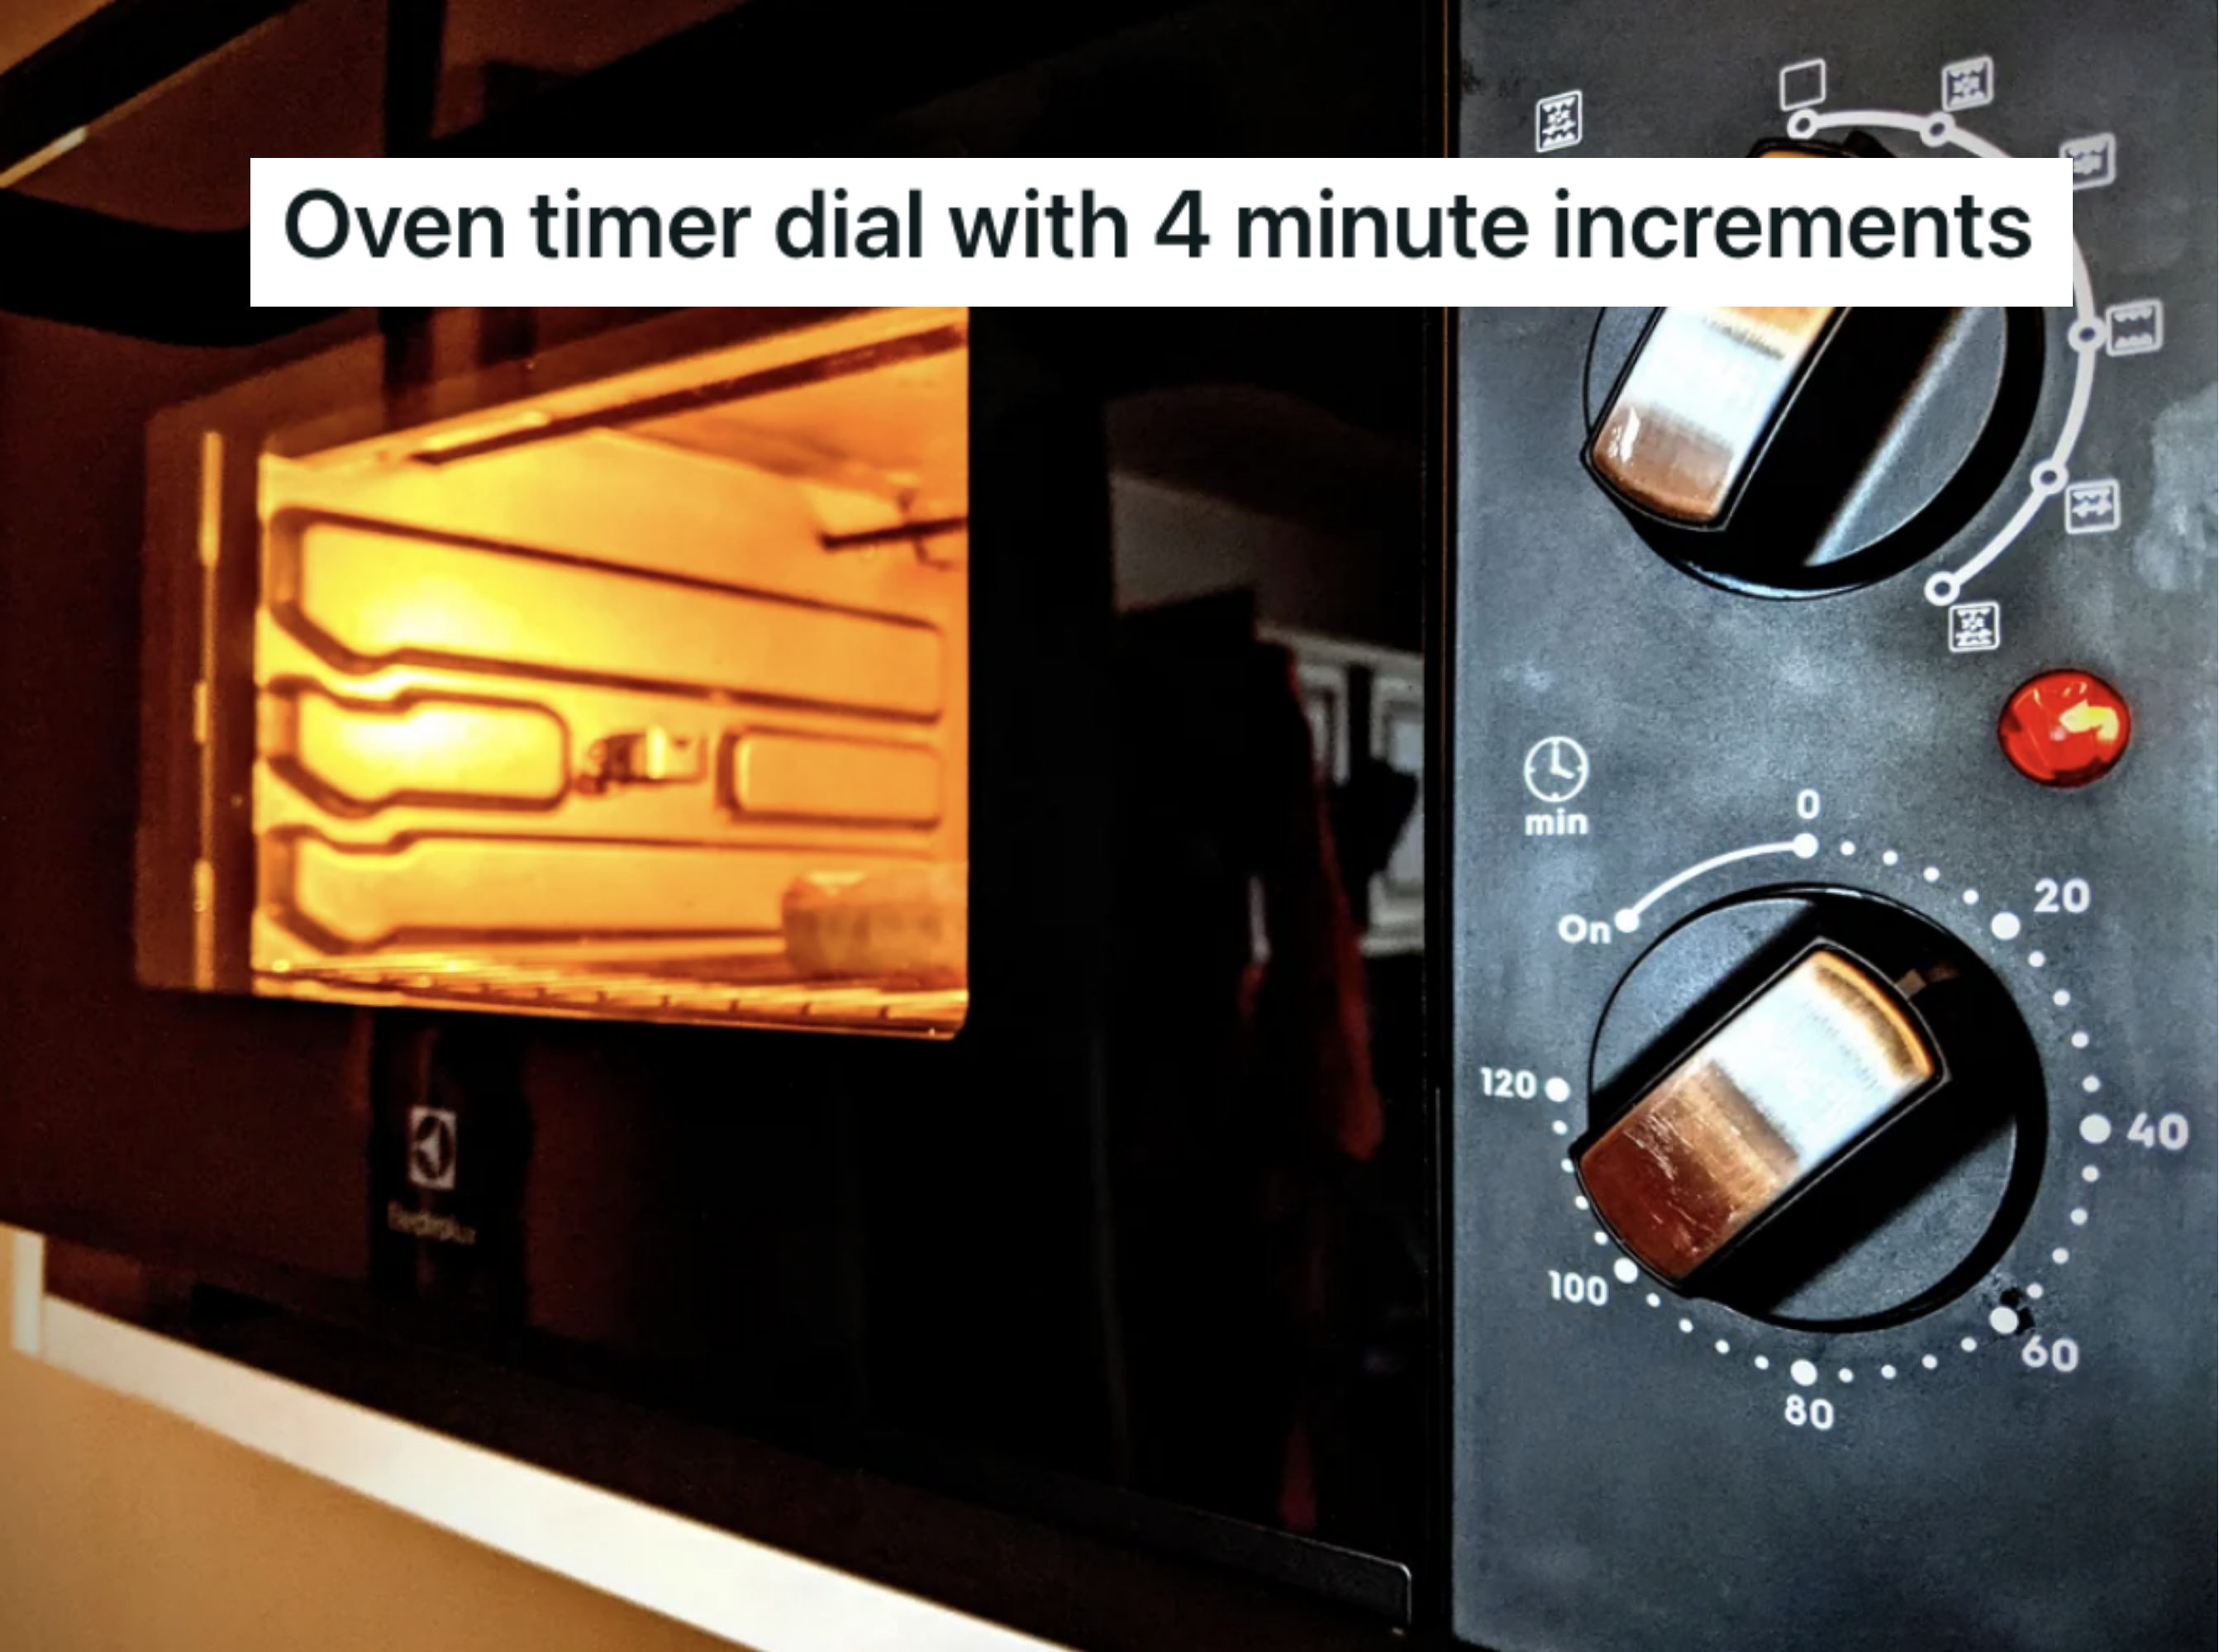 &quot;Oven timer dial with 4 minute increments&quot;